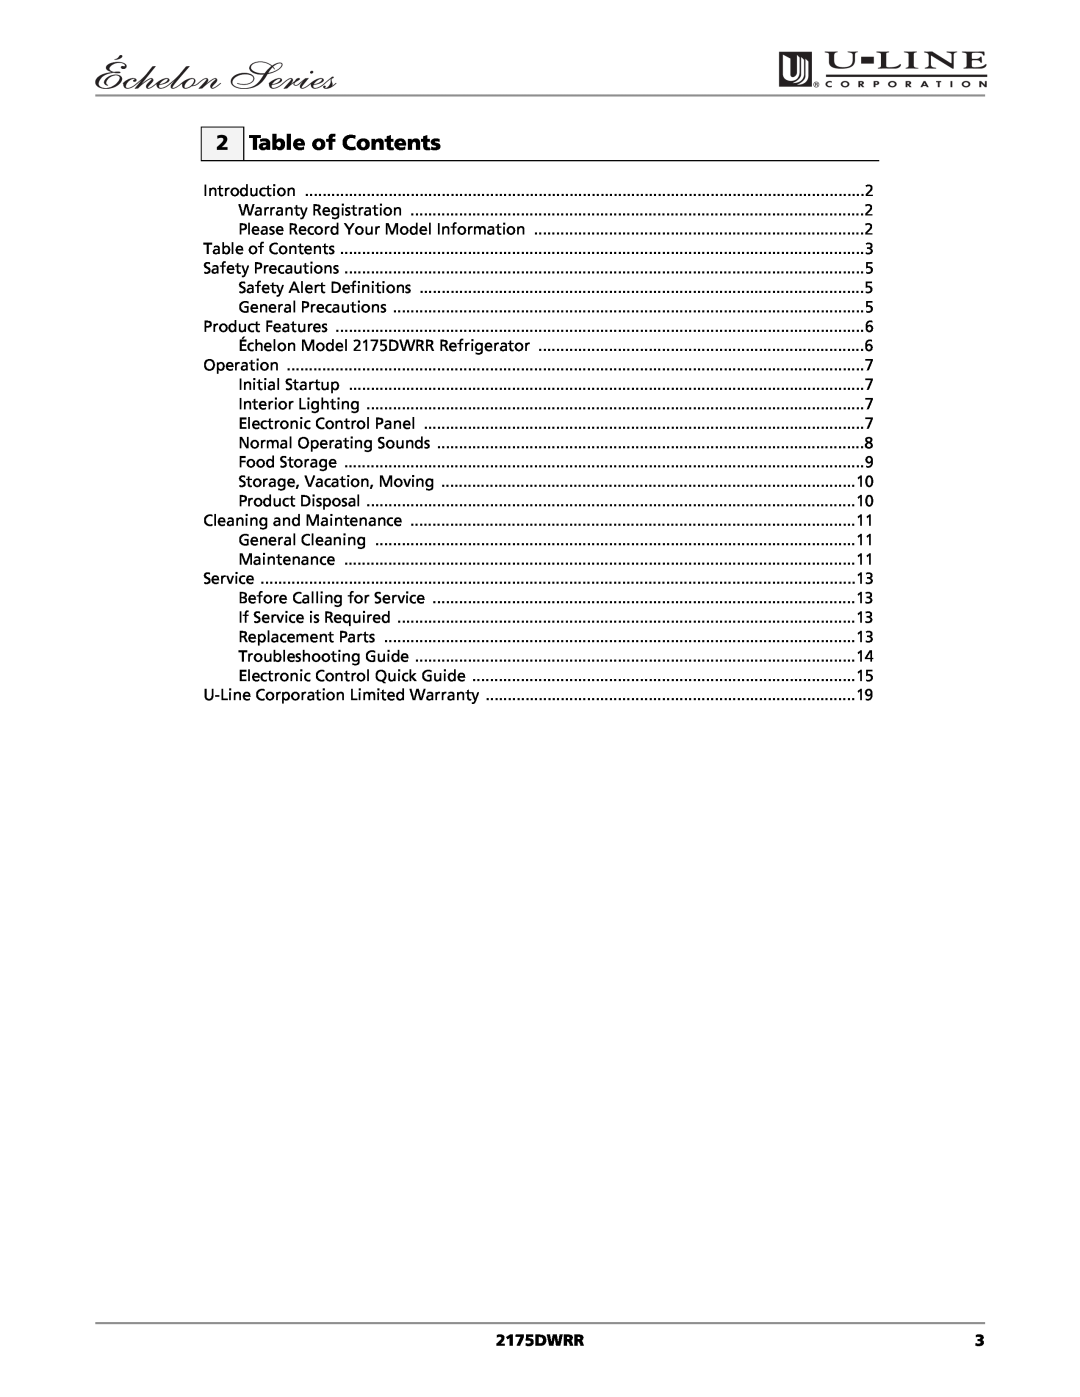 U-Line 2175DWRR manual Table of Contents 